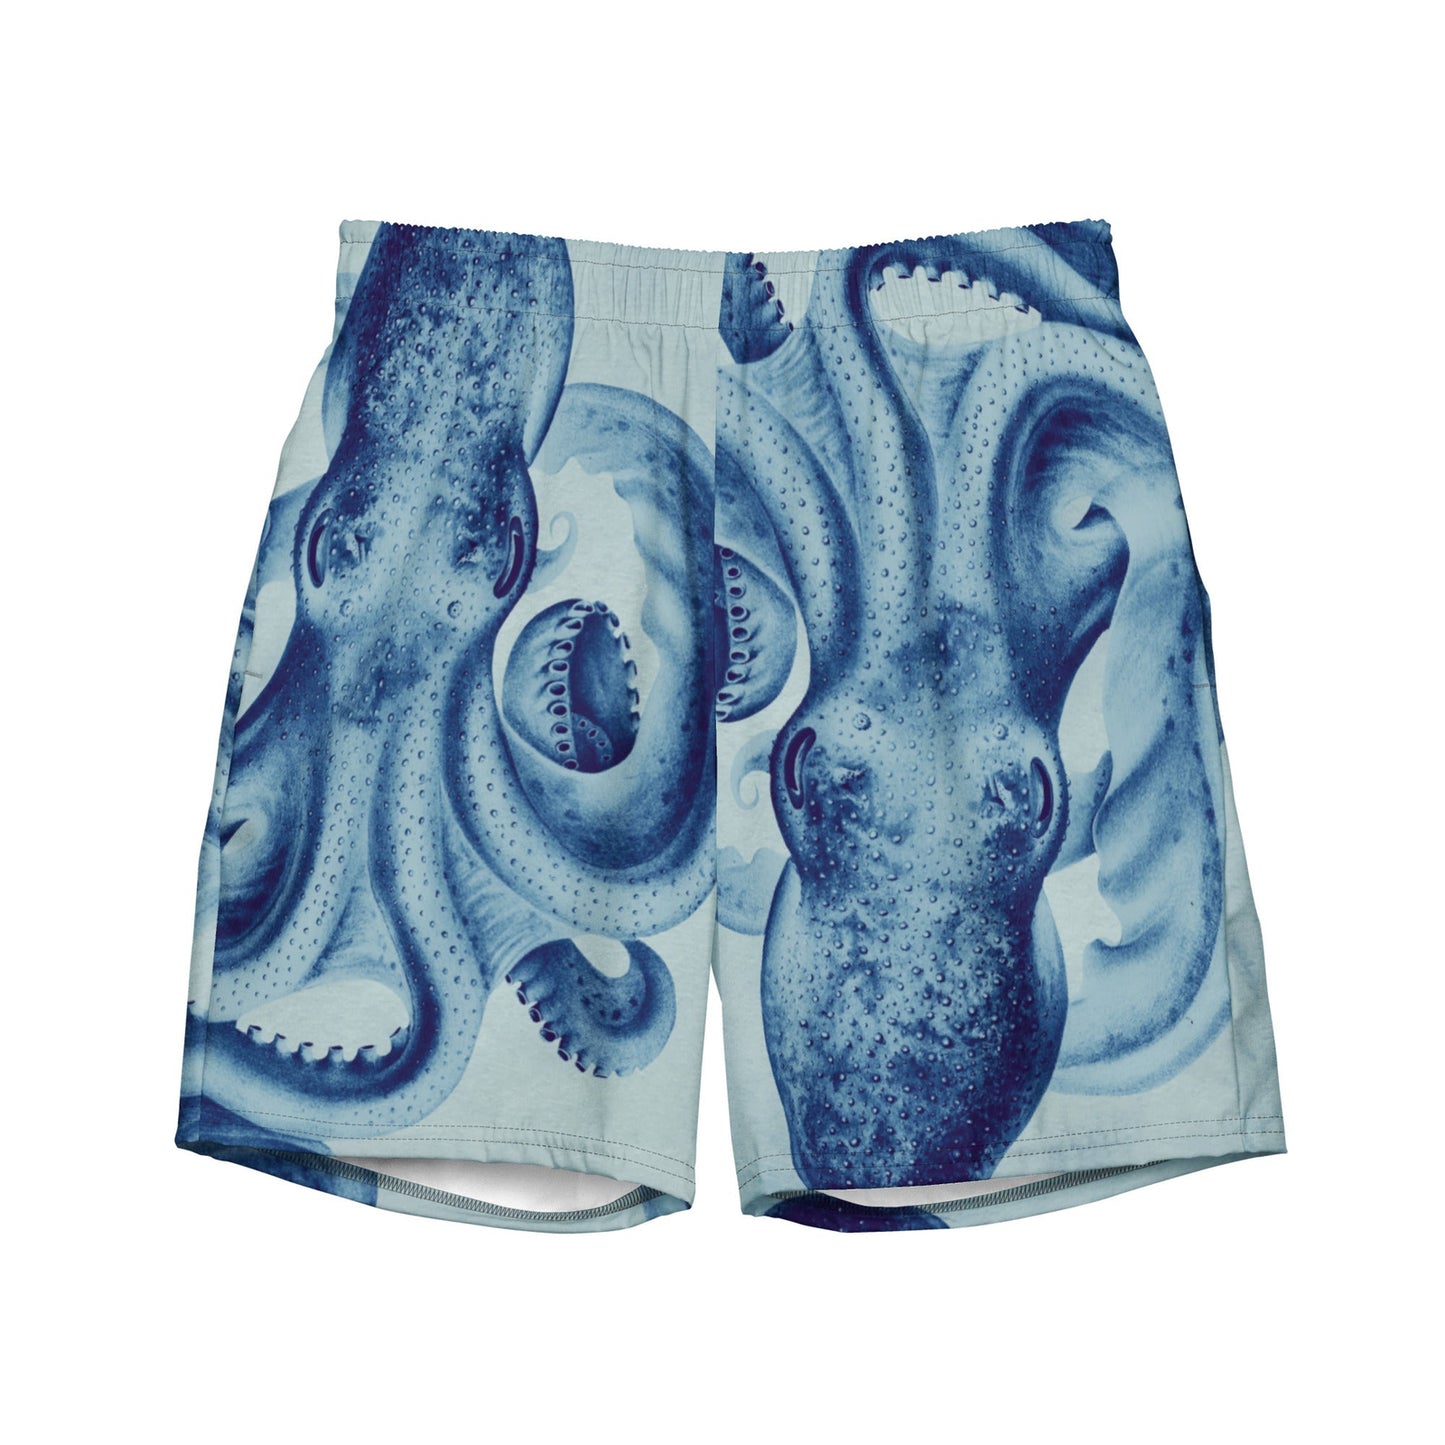 Octopus - men's swim trunks made from recycled polyester